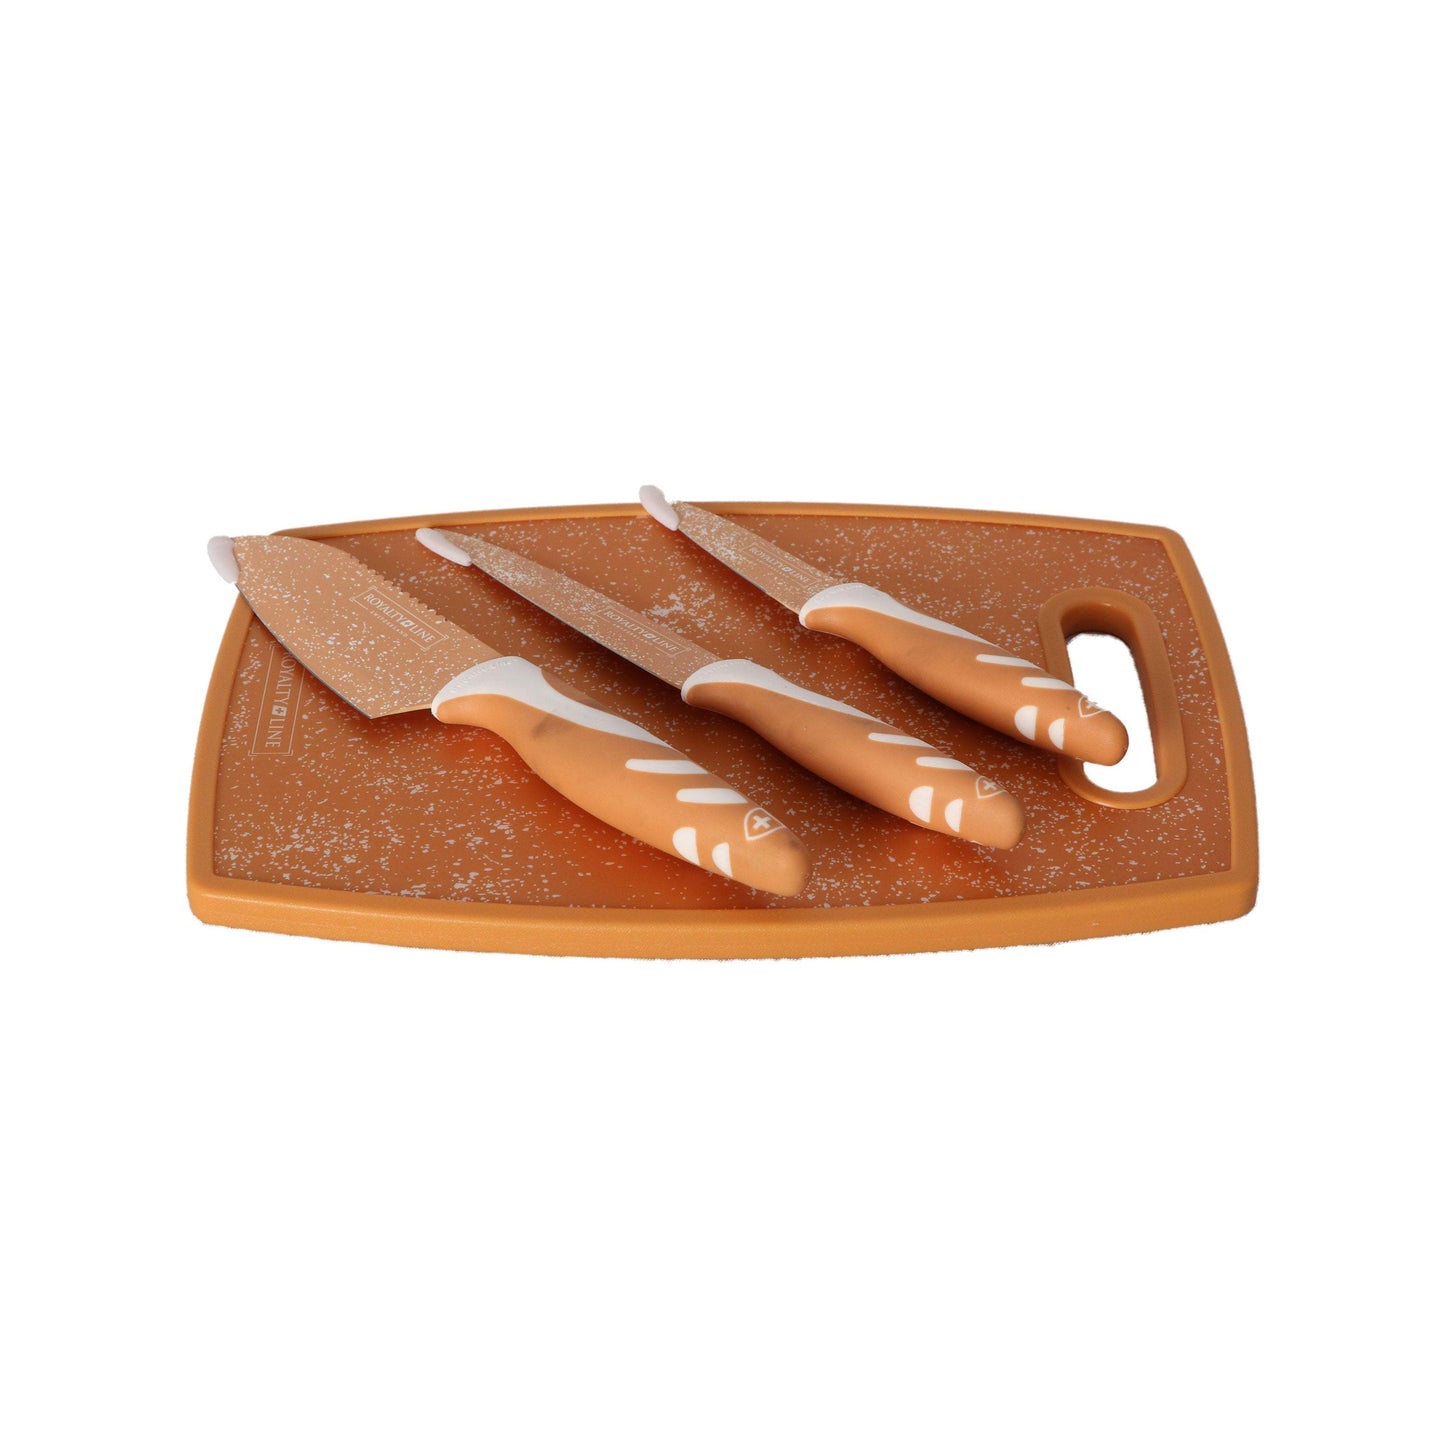 Royalty Line Knives Set Of 3 Pieces With Cutting Marble - Caramel-Royal Brands Co-